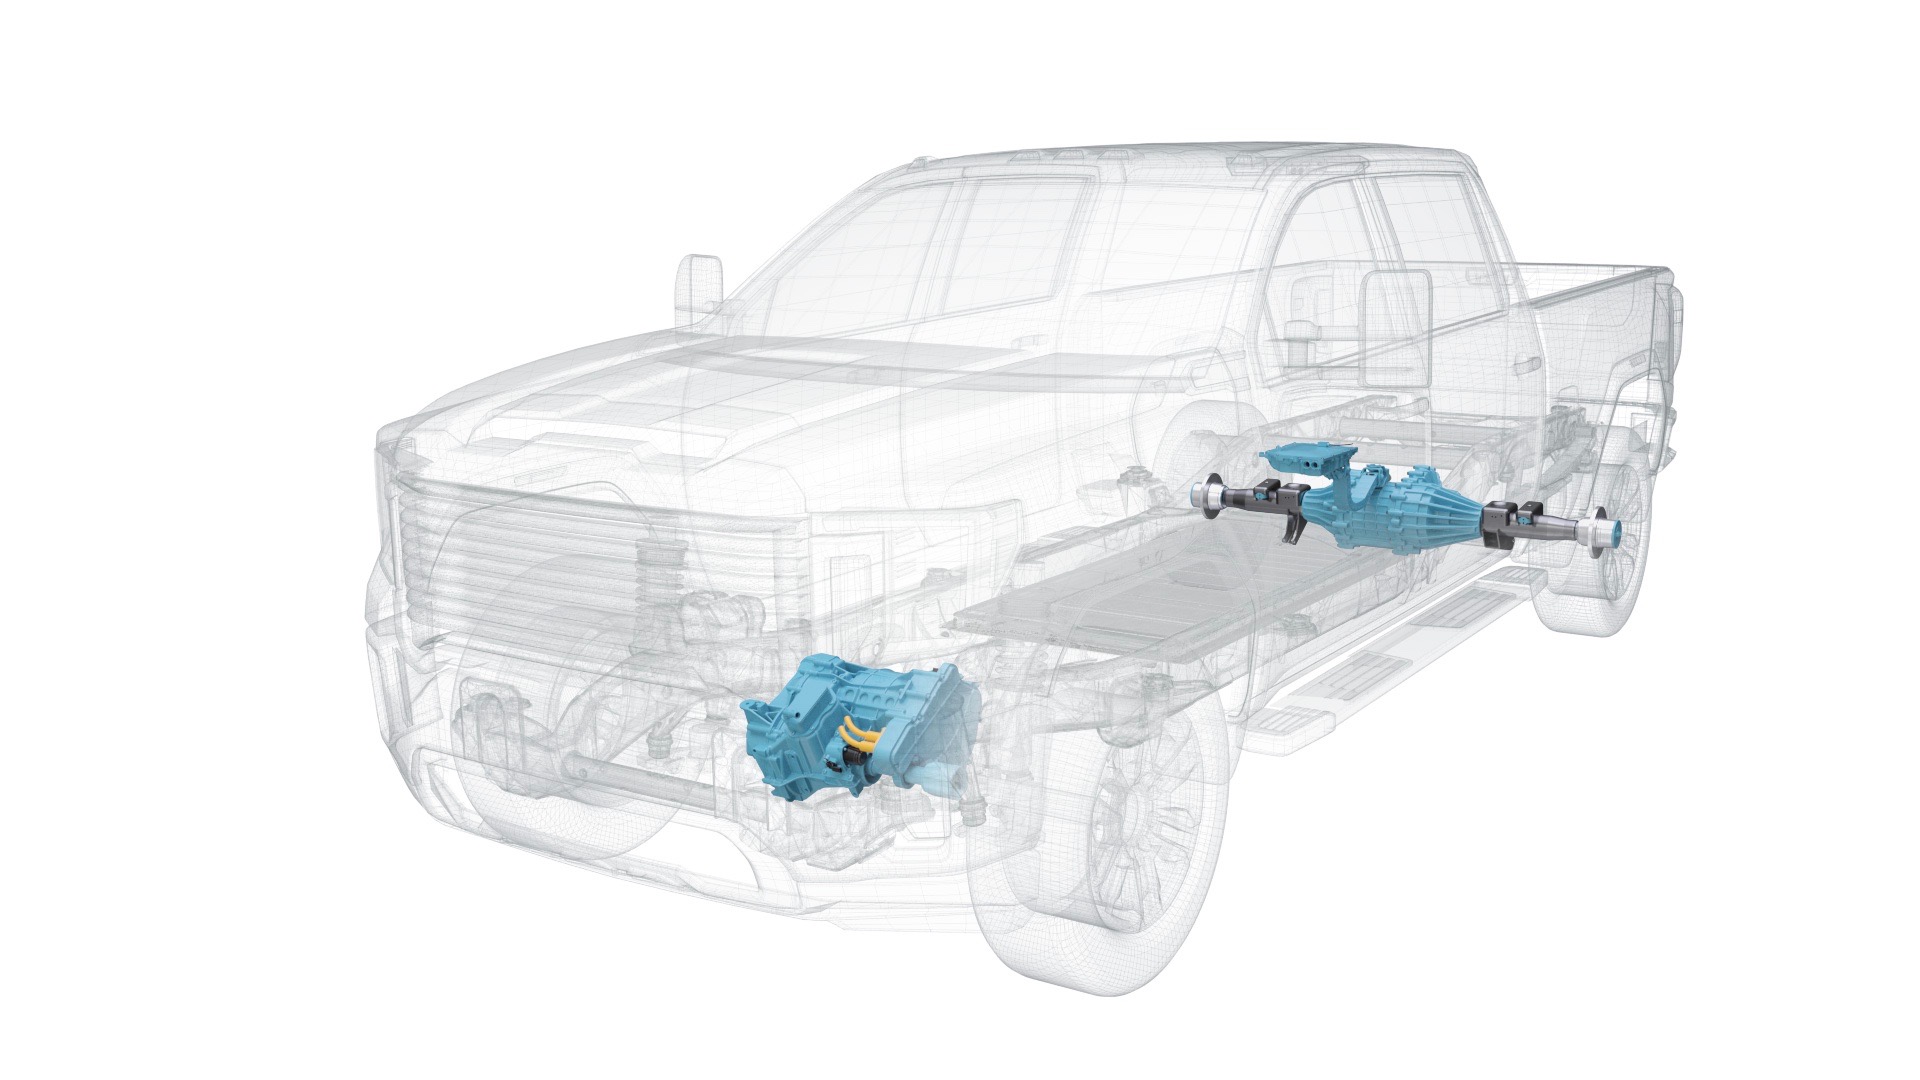 Magna shows how heavy-duty pickups can go all-electric without lower towing, payloadMagna shows how heavy-duty pickups can go all-electric without lower towing, payload